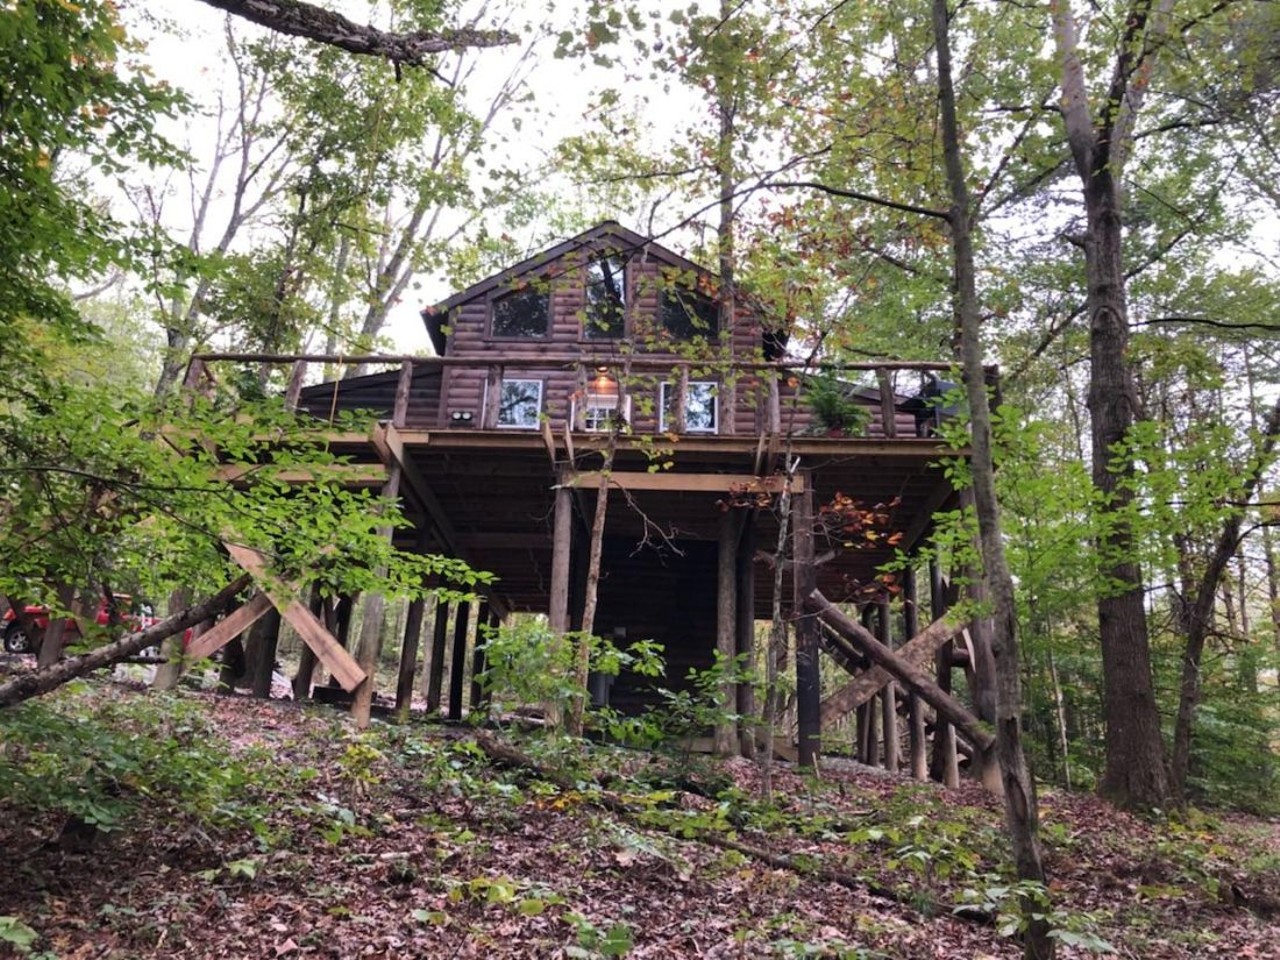  Cozy Treehouse Cabins
22784 Purcell Rd., South Bloomingville
The Hocking Hills is one of the more popular outdoor tourist attractions in the state and for good reason. And this treehouse cabin, built in 2017, is the perfect place to stay in the hills.
Photo via Cozy Treehouse Cabins/Facebook